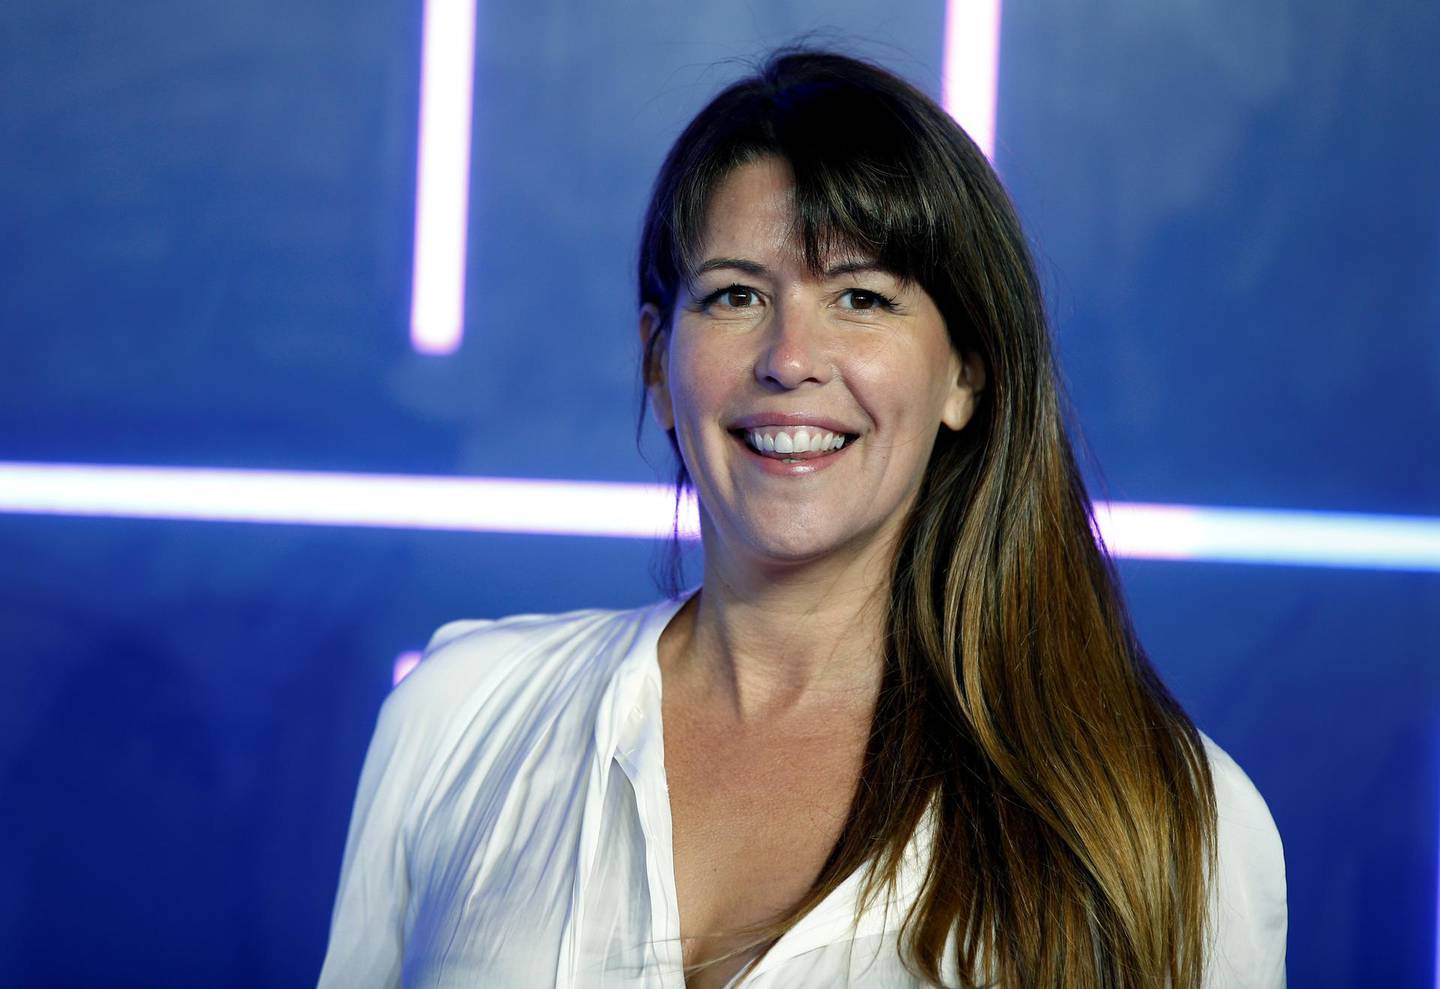 FILE PHOTO: Patty Jenkins attends the European Premiere of "Ready Player One" in London, Britain, March 19, 2018. REUTERS/Henry Nicholls/File Photo